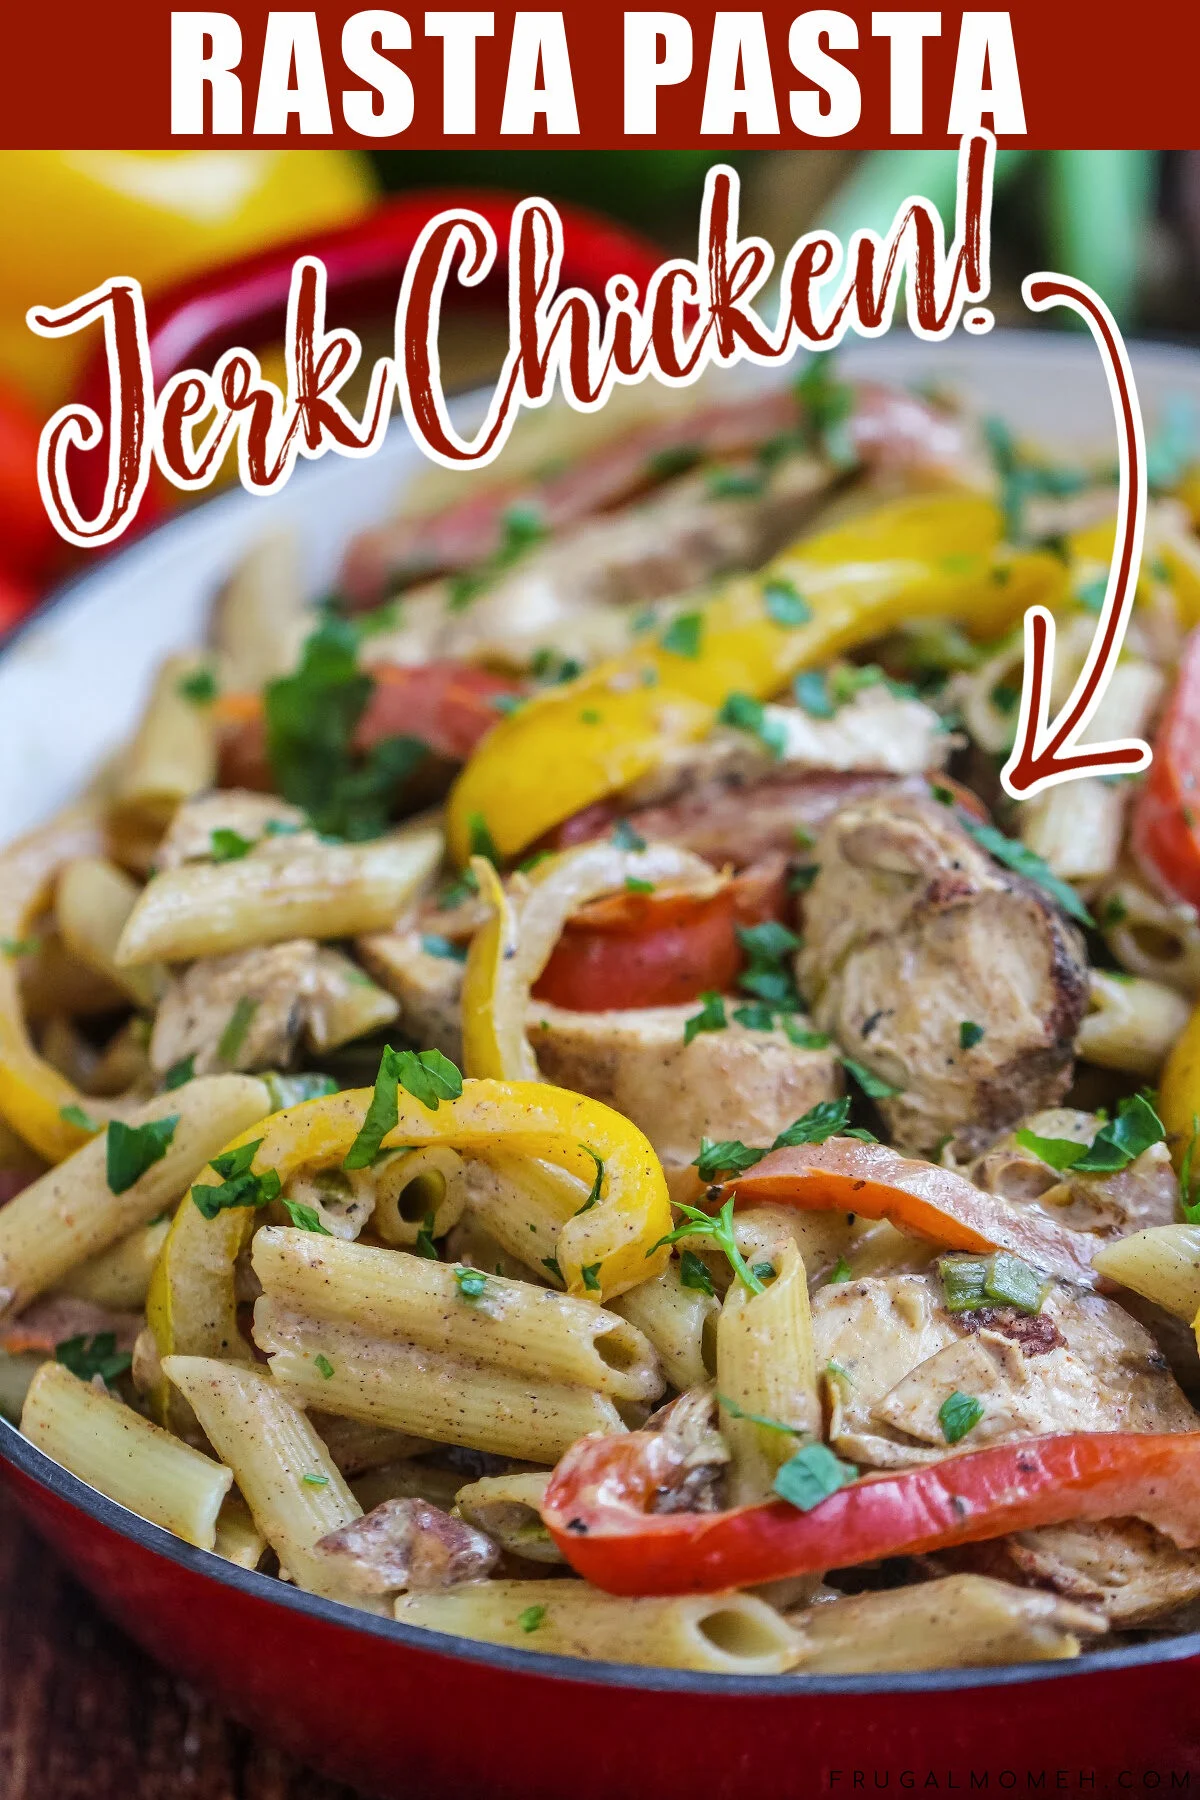 This Jamaican jerk chicken pasta will have your family licking their plates, this Rasta Pasta Recipe is a Jamaican-inspired meal you'll love!